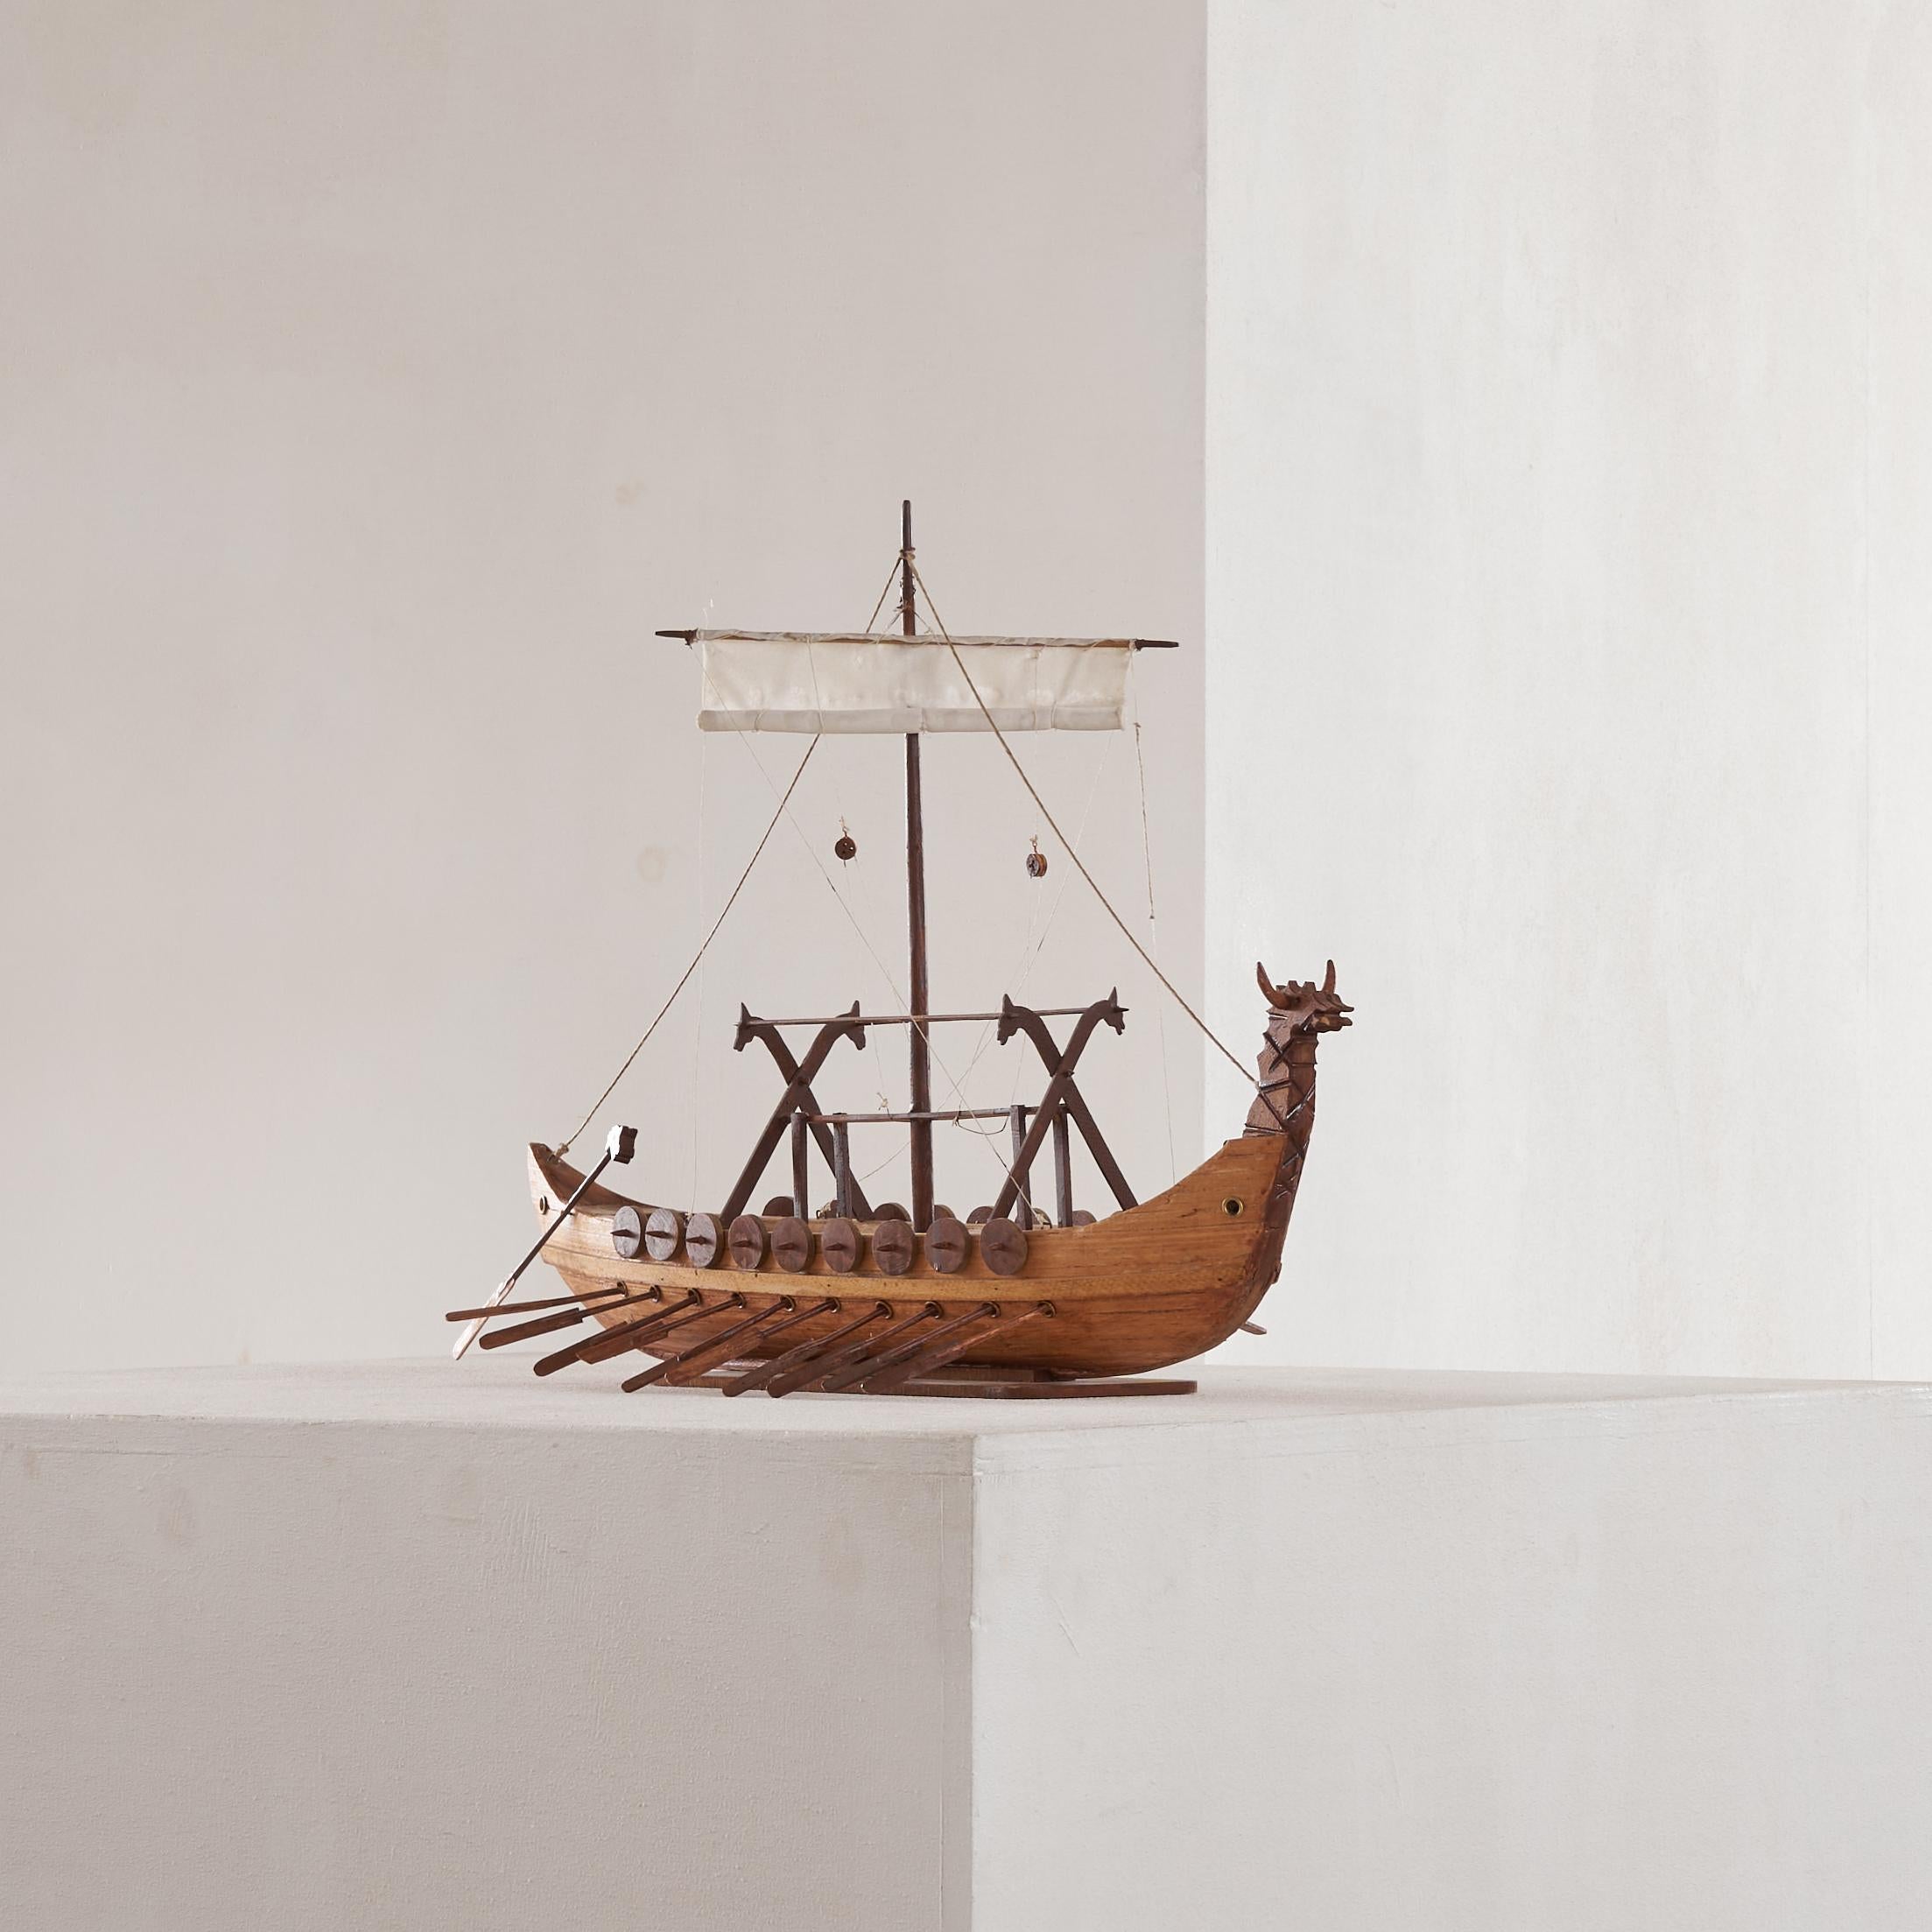 Mid Century Folk Art Viking Ship in Wood 1960s.

Beautiful folk art viking ship, made by a craftsman at home or maybe as a school project somewhere around the 1960s or 1970s. Wonderfully detailed, but naive and rough at the same time - this viking